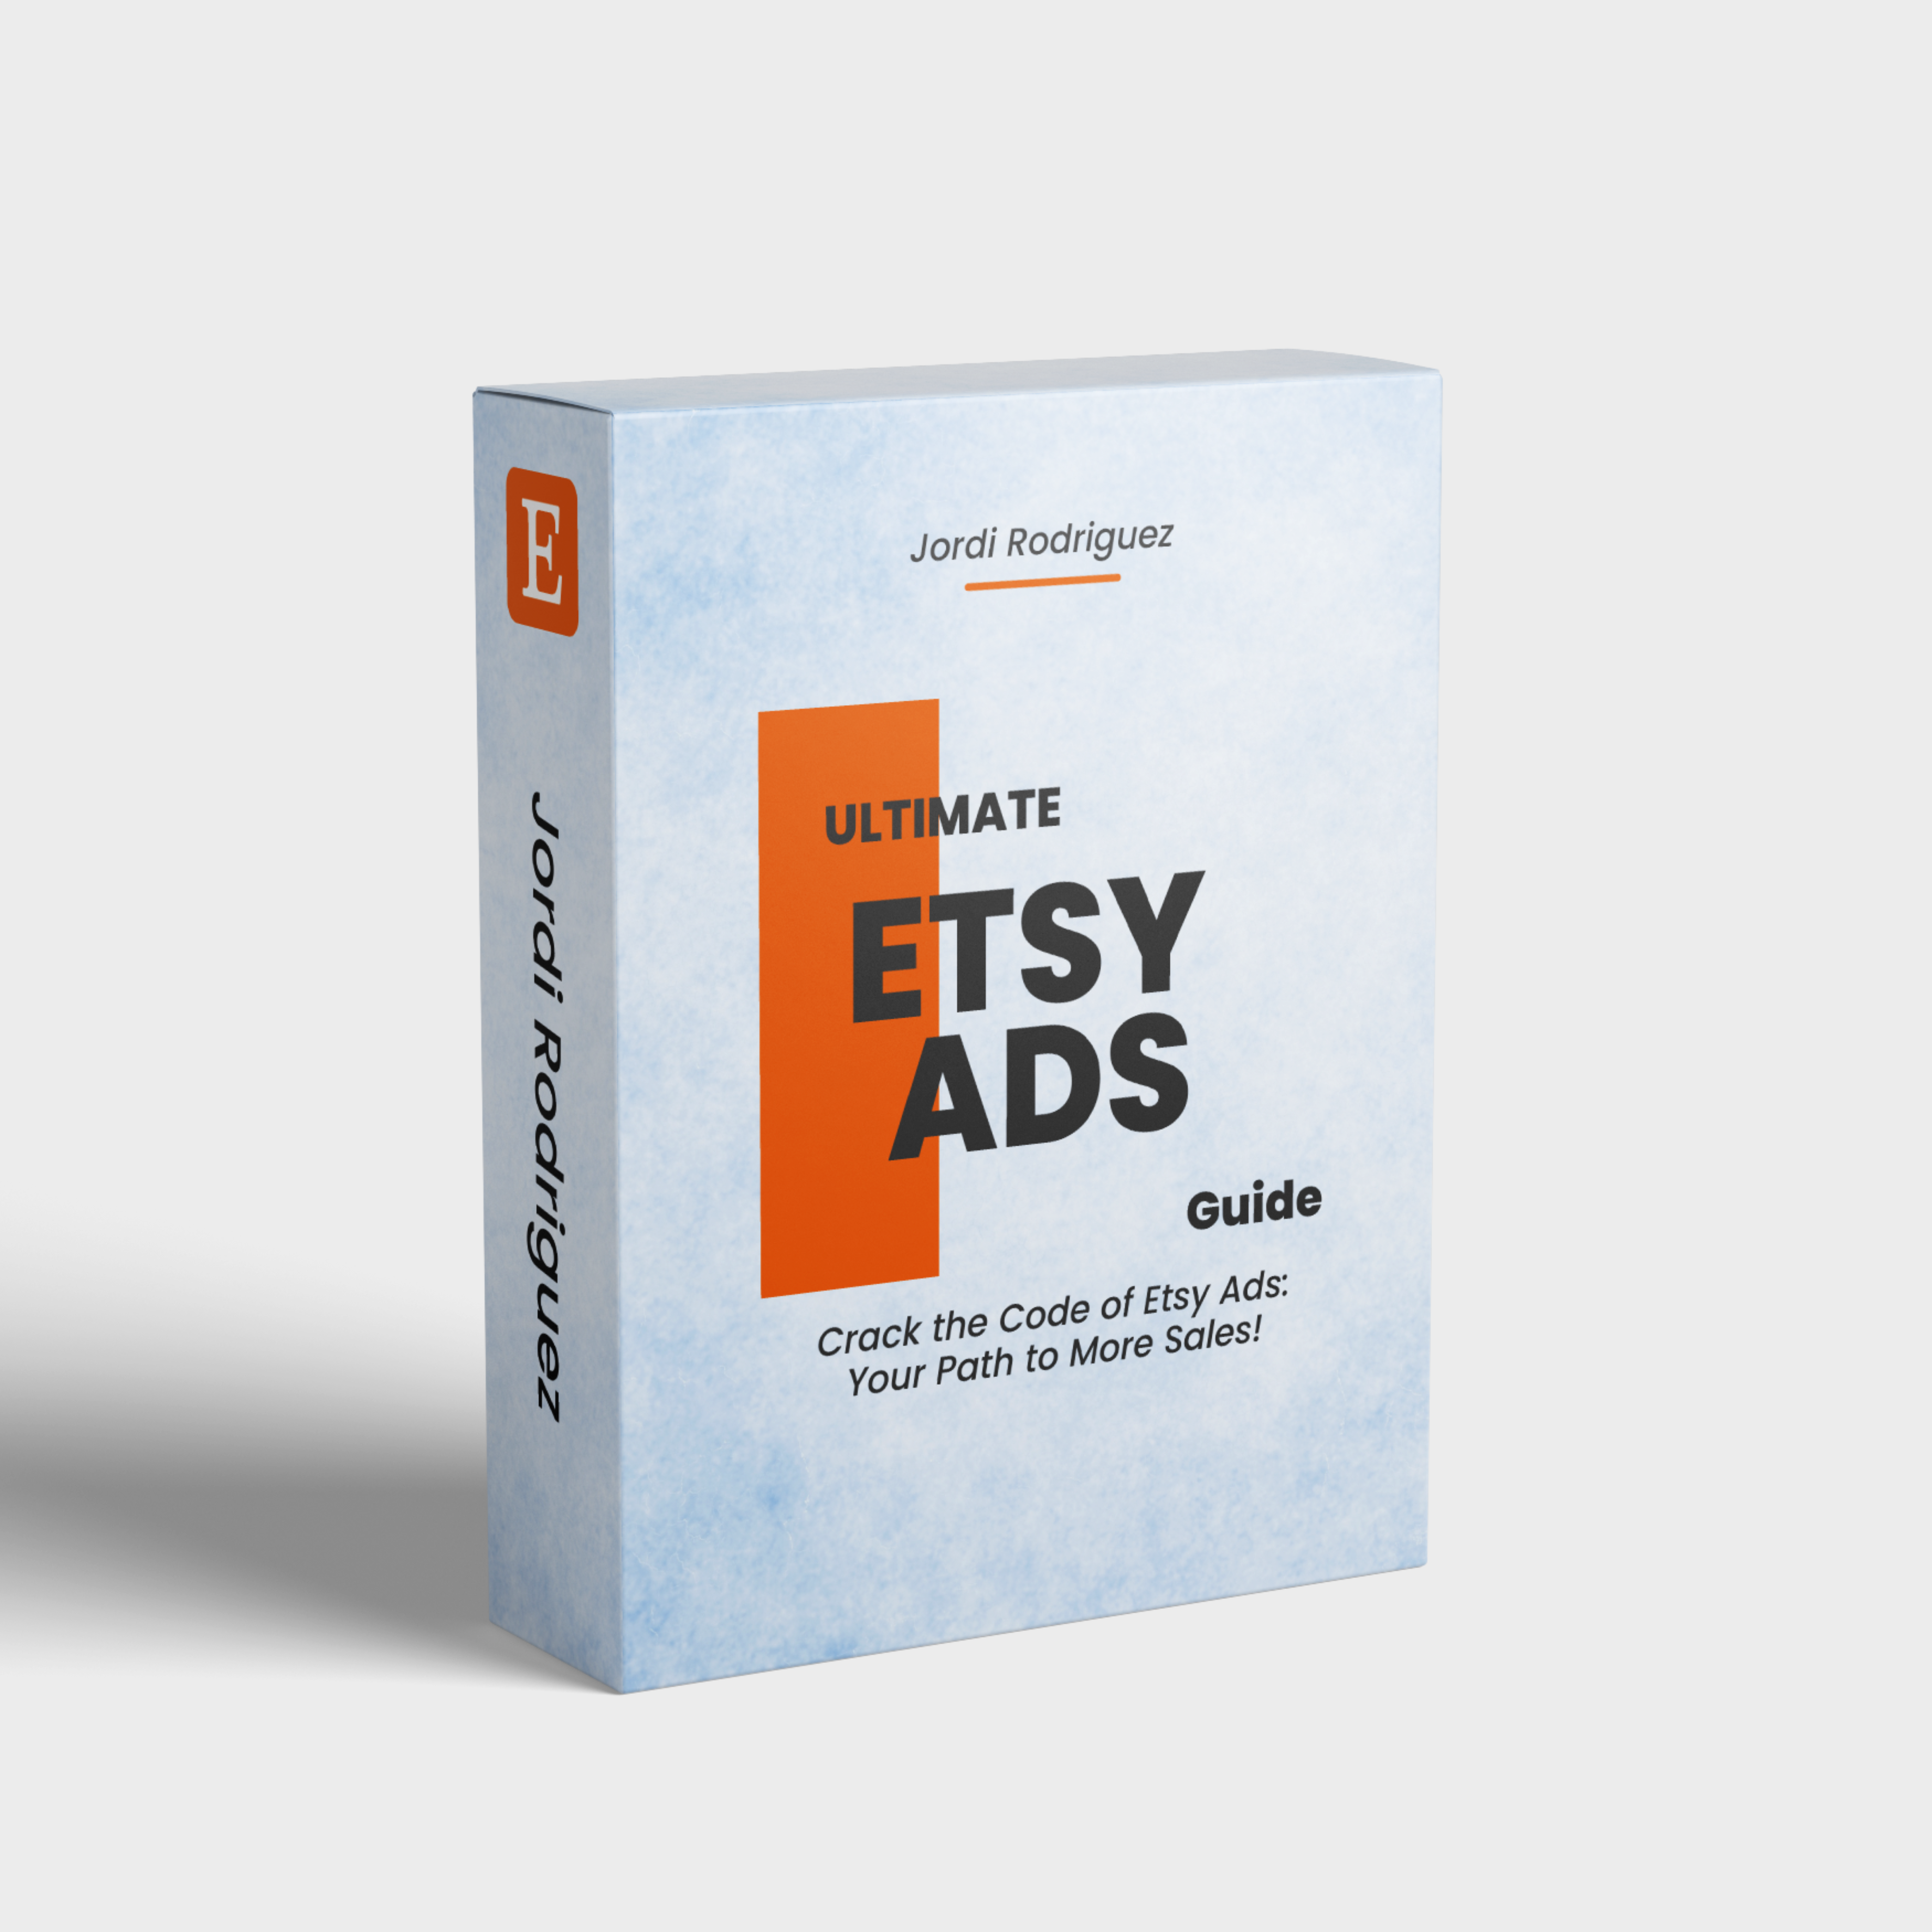 Ultimate Etsy Ads Guide